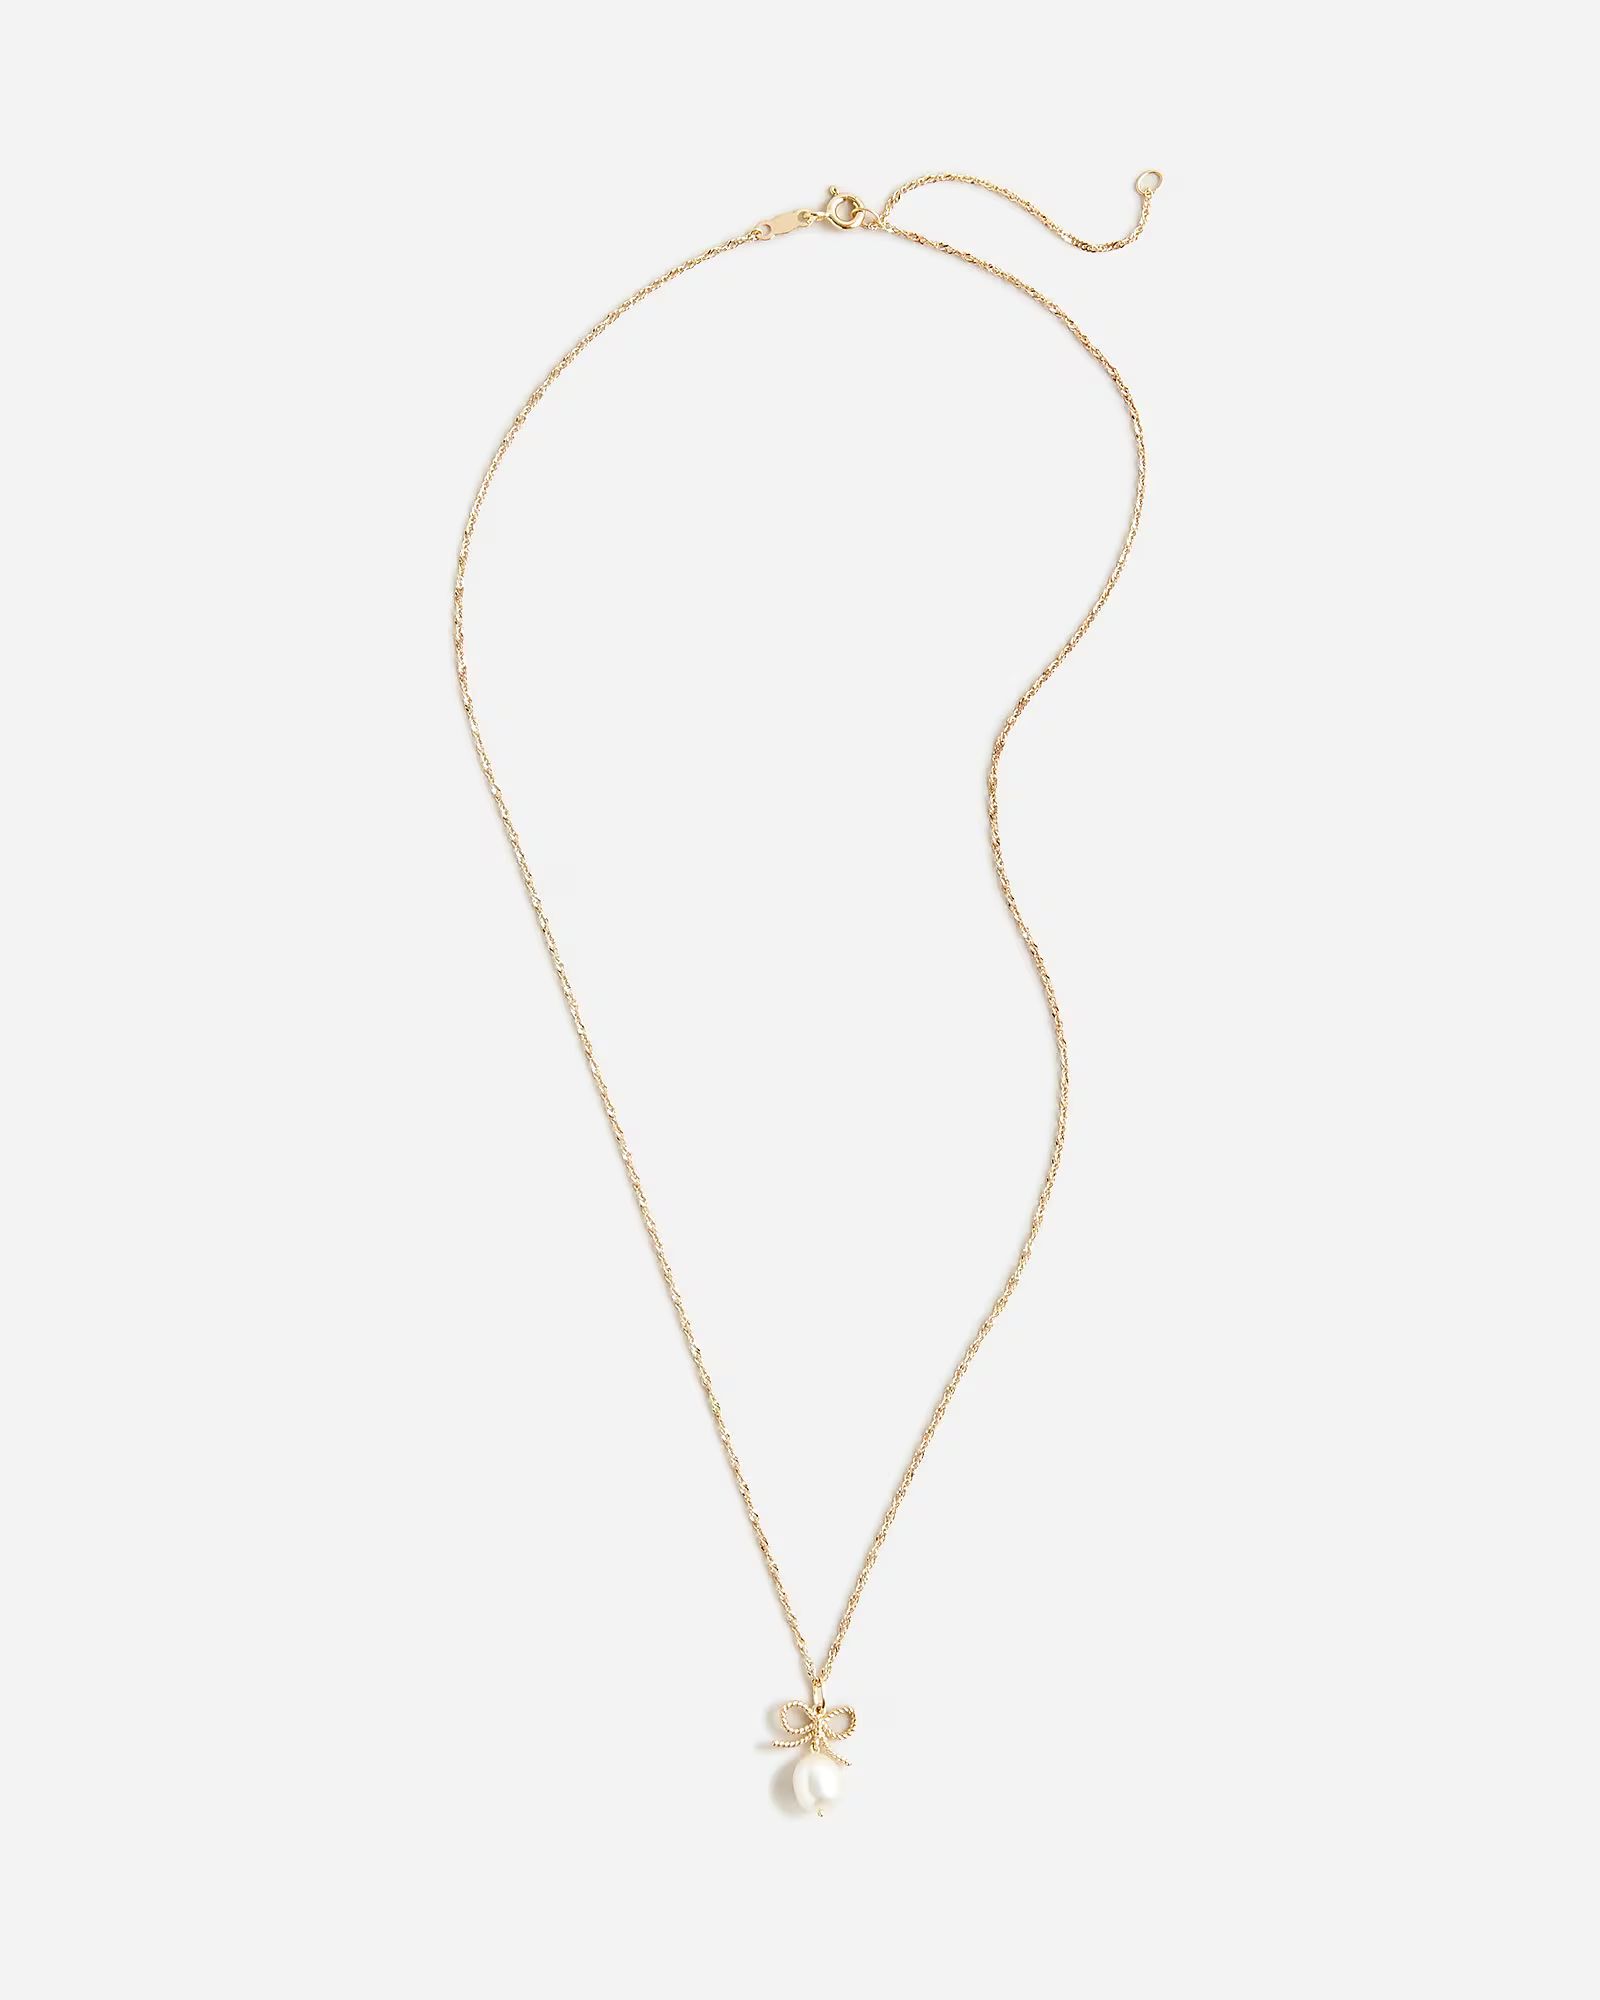 Catbird™ X J.Crew rope bow necklace with pearls | J.Crew US